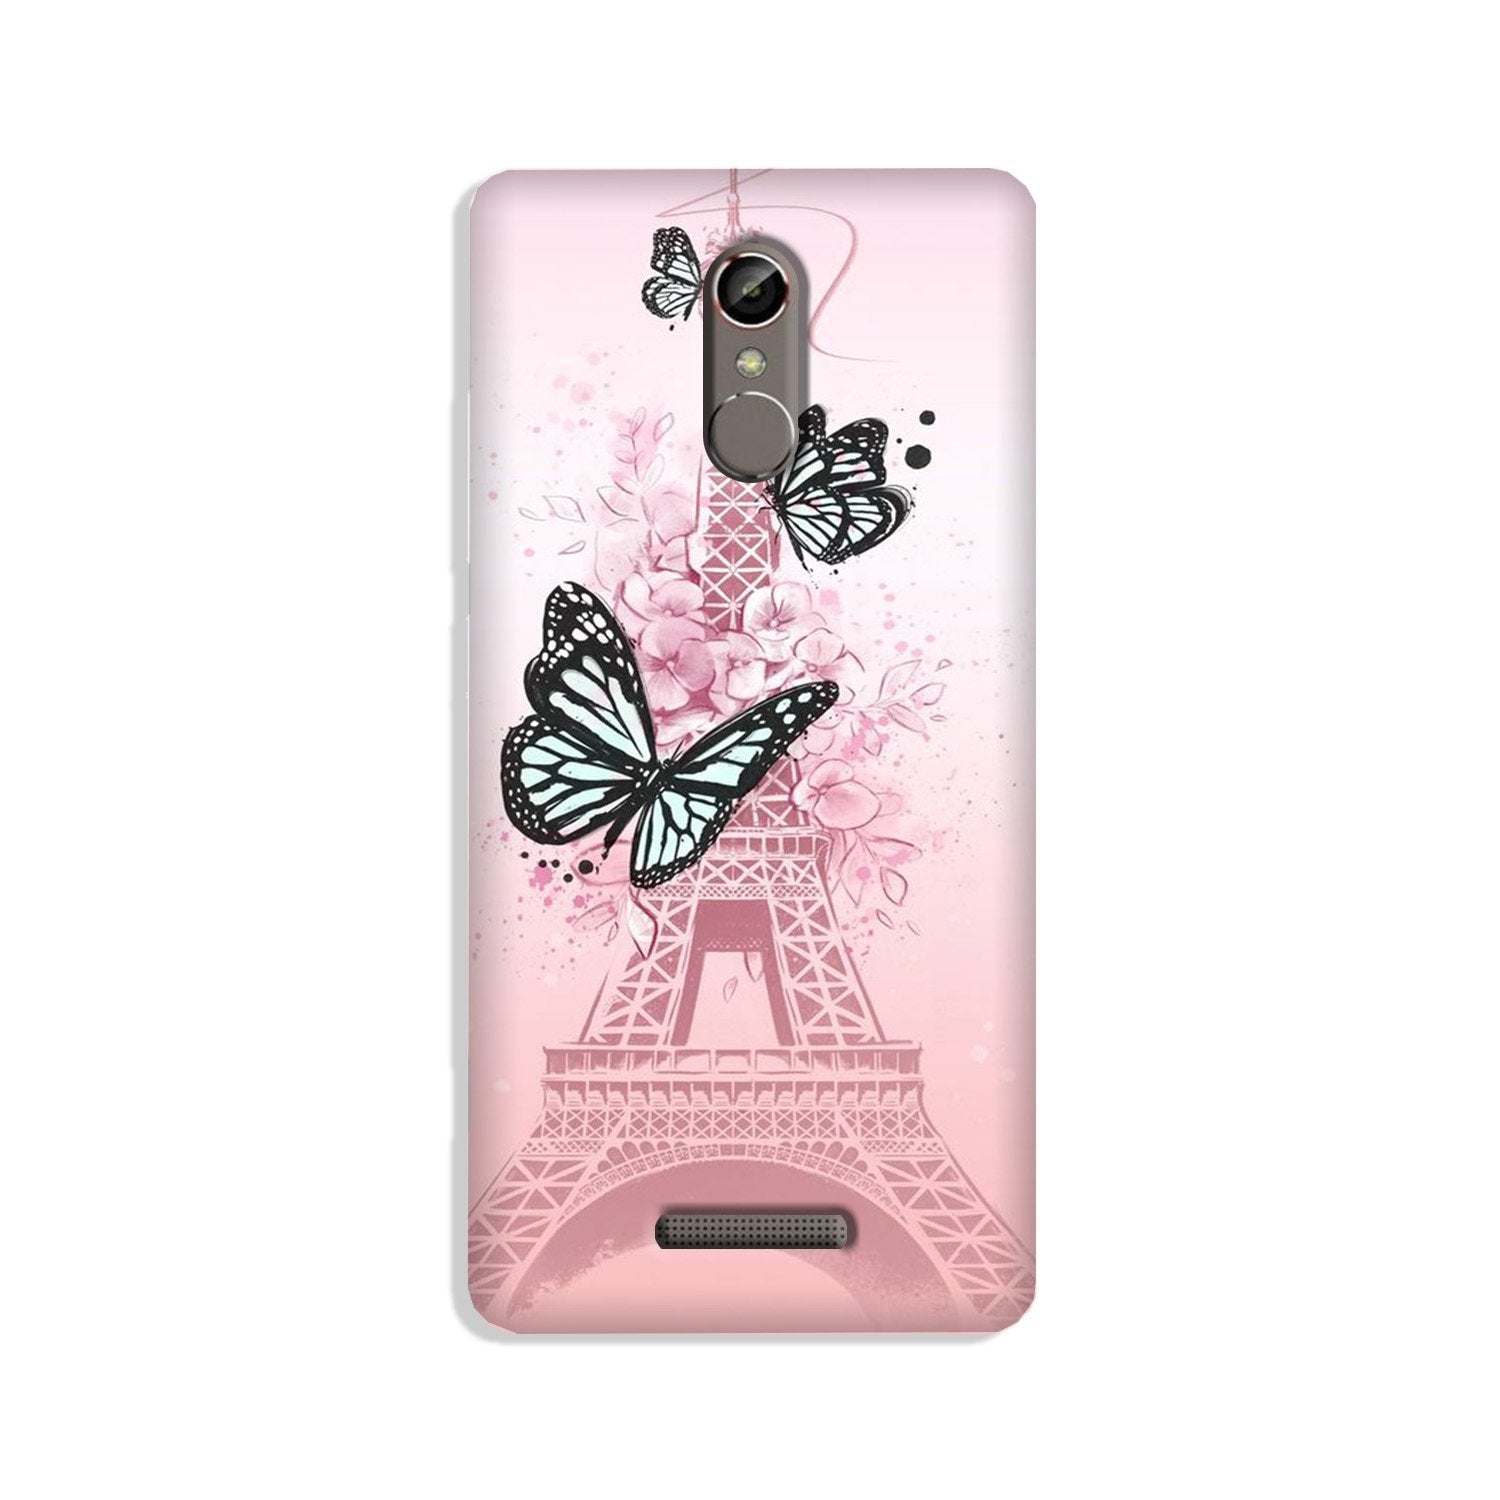 Eiffel Tower Case for Gionee S6s (Design No. 211)